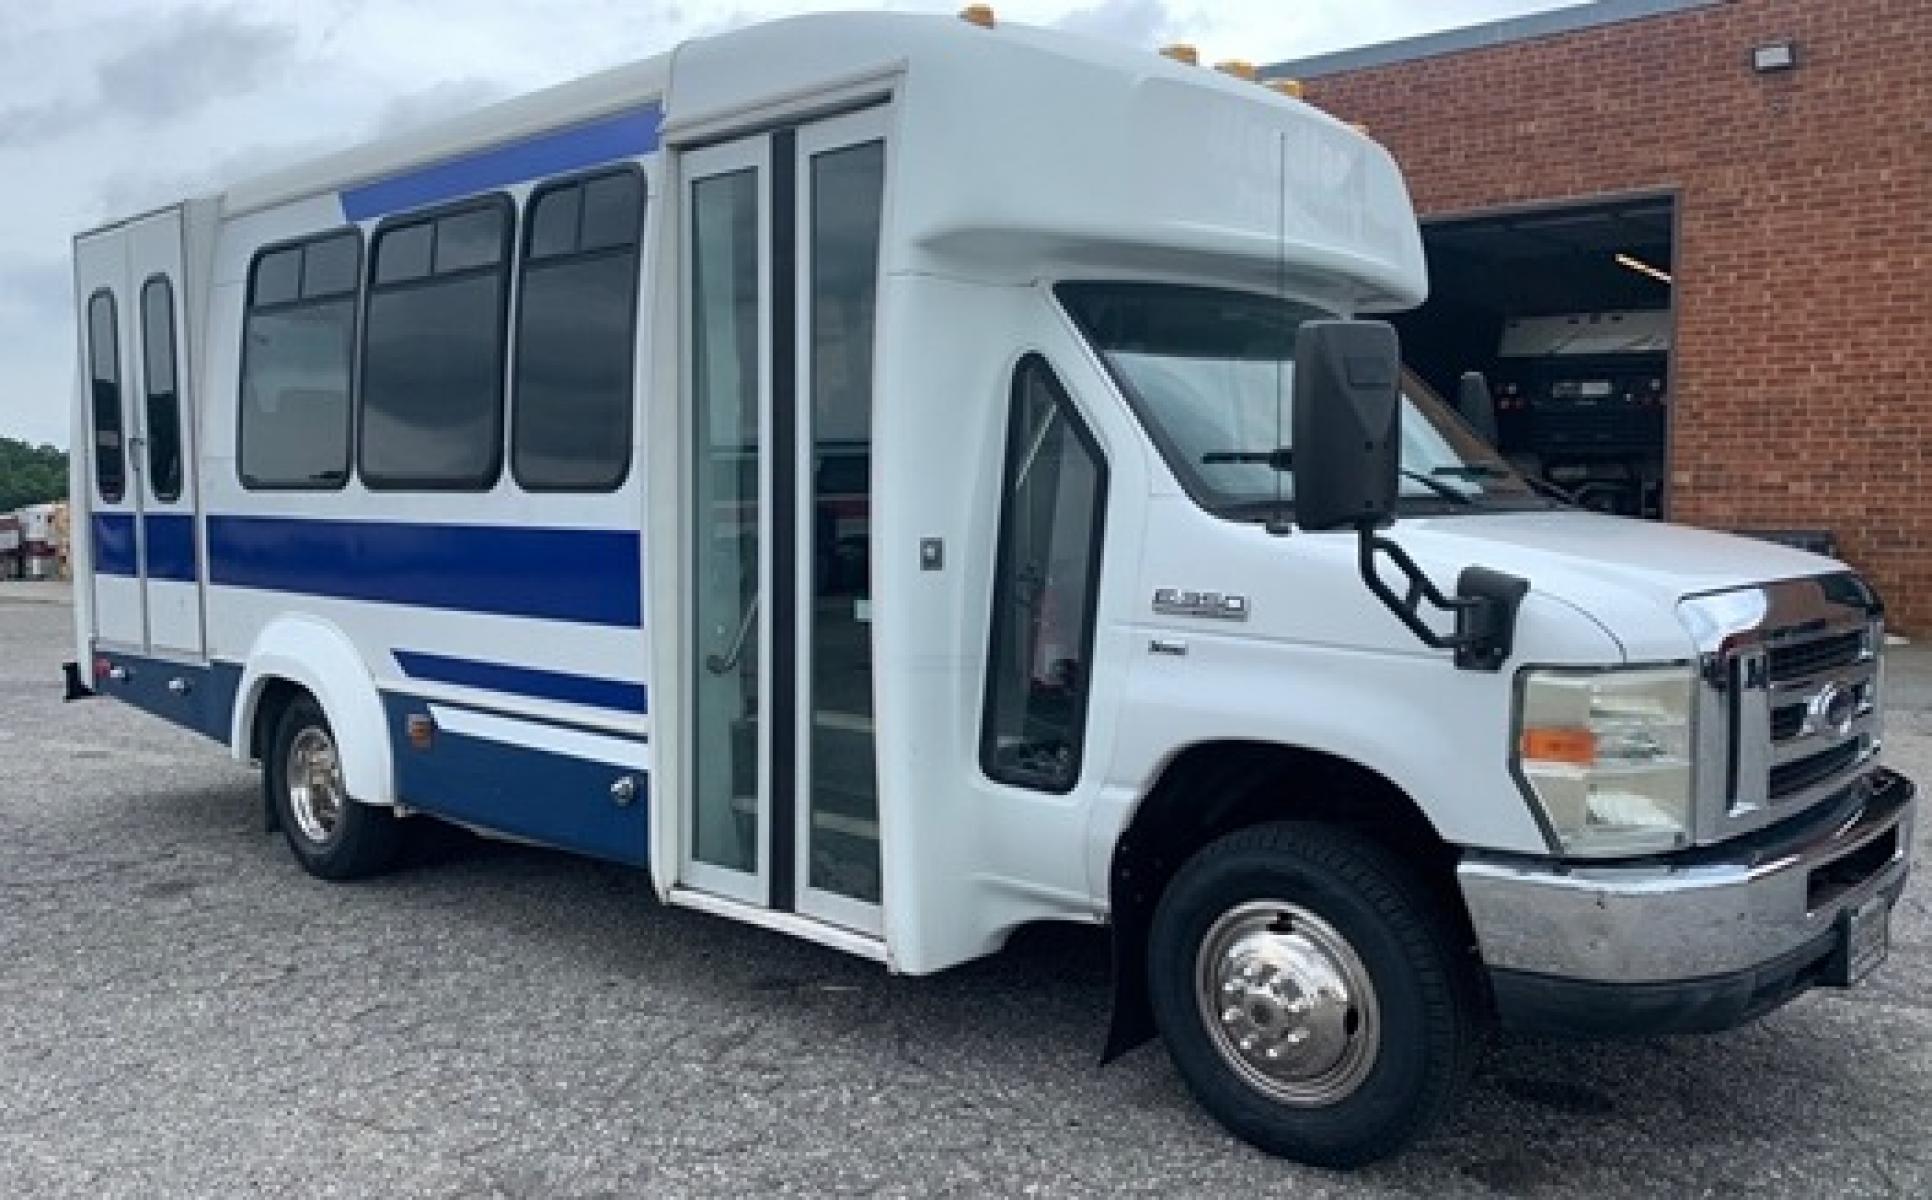 2009 White Ford E350 with an V8 engine, Auto transmission, 0.000000, 0.000000 - 2009 Ford E-350 Elkhart Conversion,- 5.4L V8 Gas Engine - Automatic Trans - Electric Entrance Door - 14 Passengers & Driver - 12 + 1 Wheelchair - High Back Seats - Retractable Seat Belts - Stainless Wheel Simulators - Front and Rear A/C - Handicap Lift - Photo #0